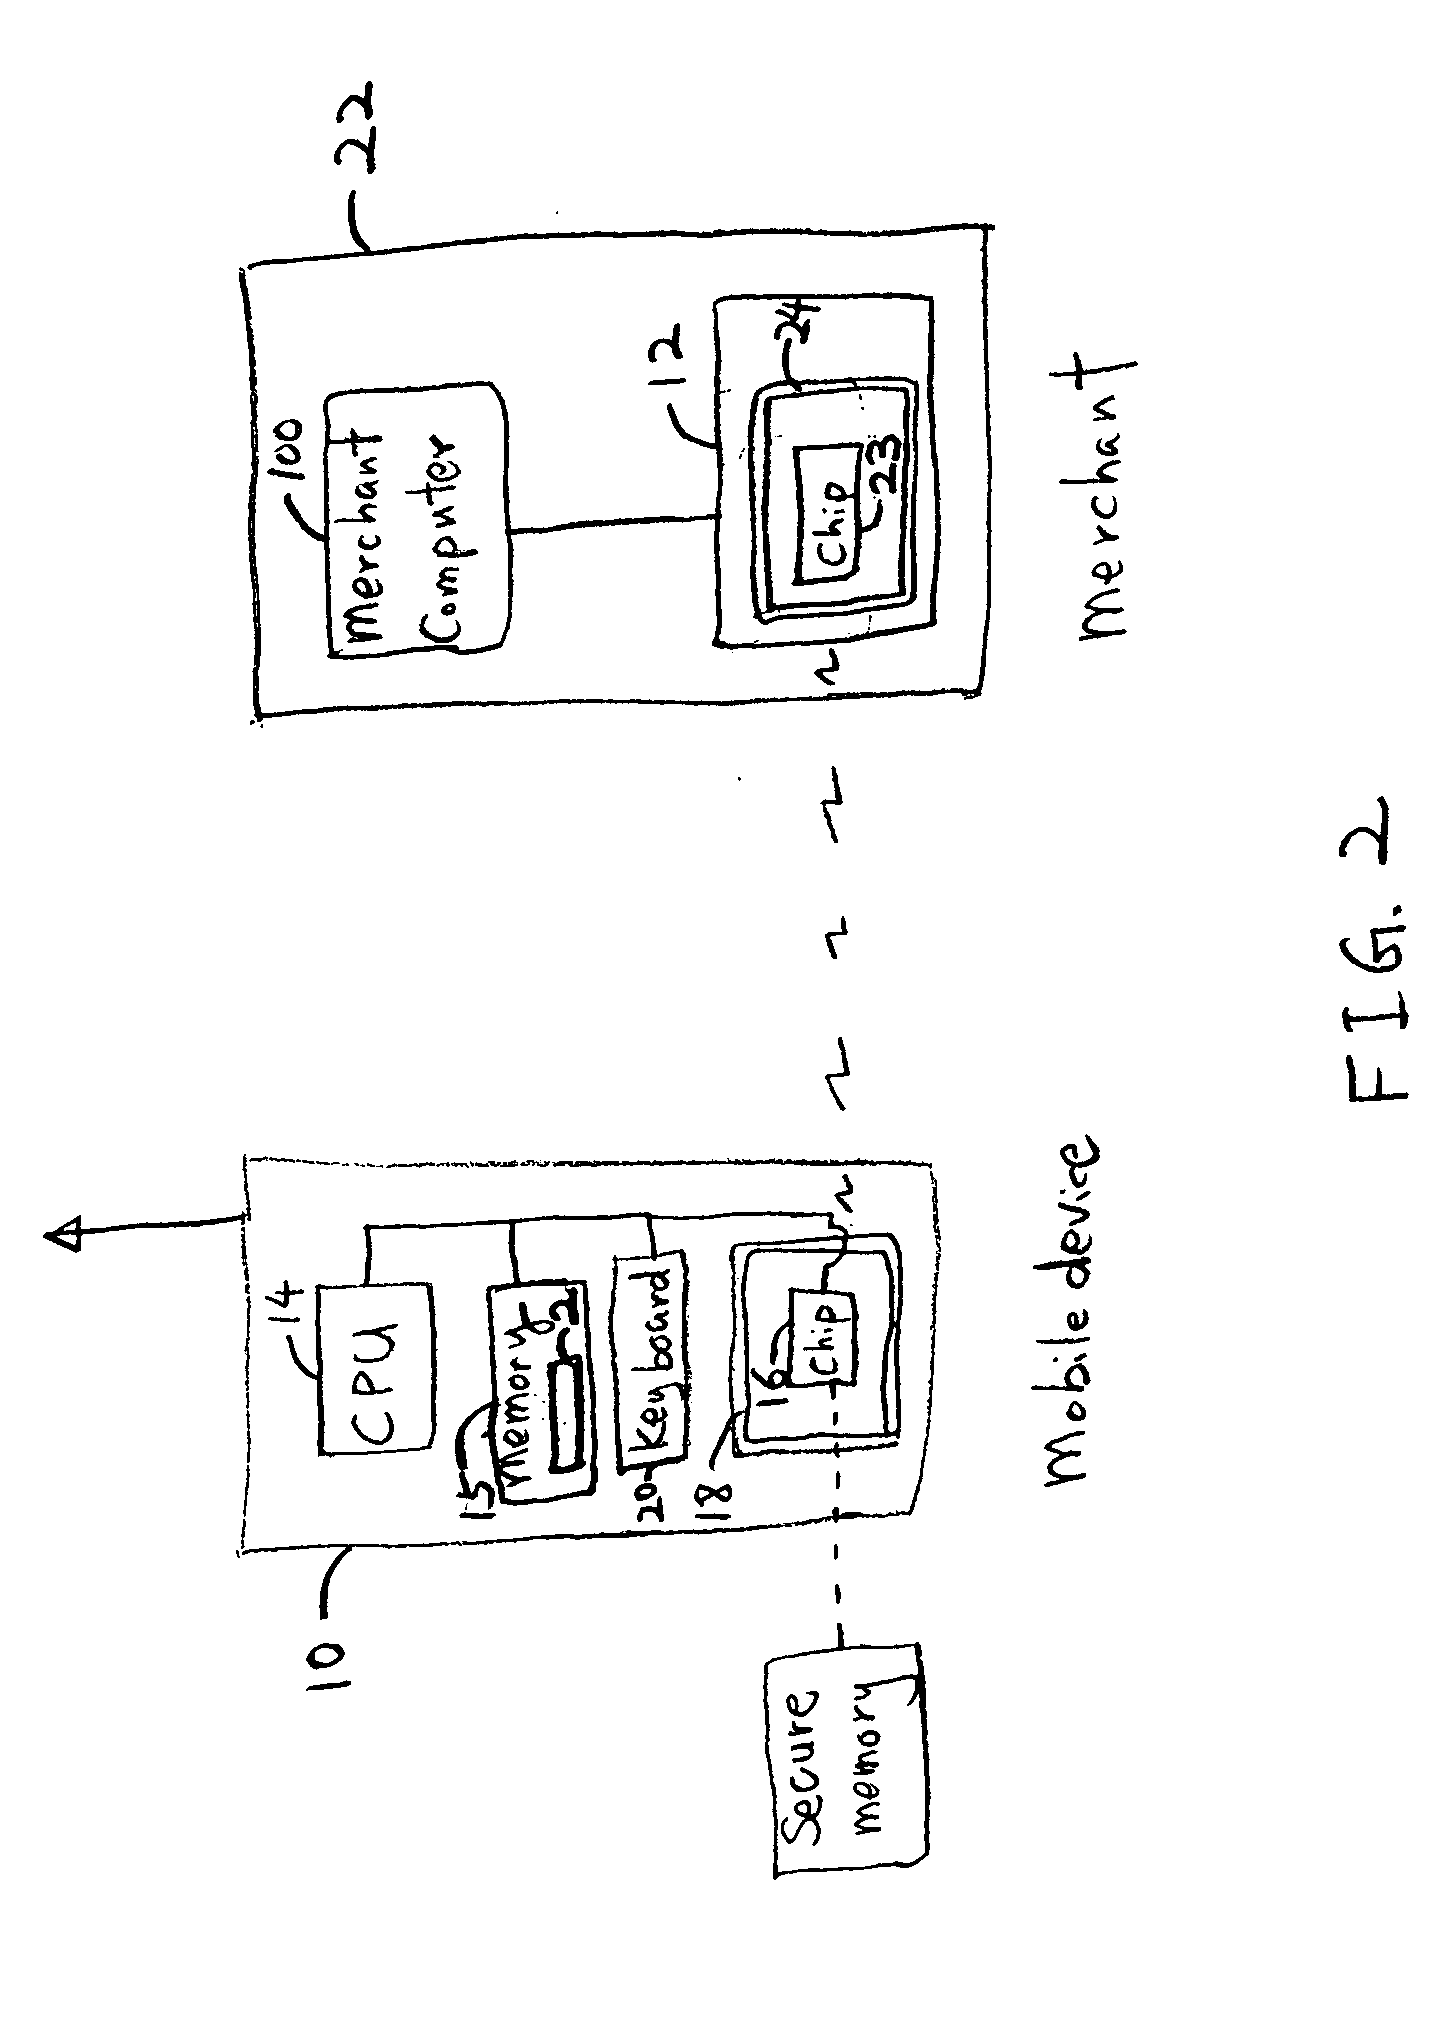 System and method of facilitating contactless payment transactions across different payment systems using a common mobile device acting as a stored value device